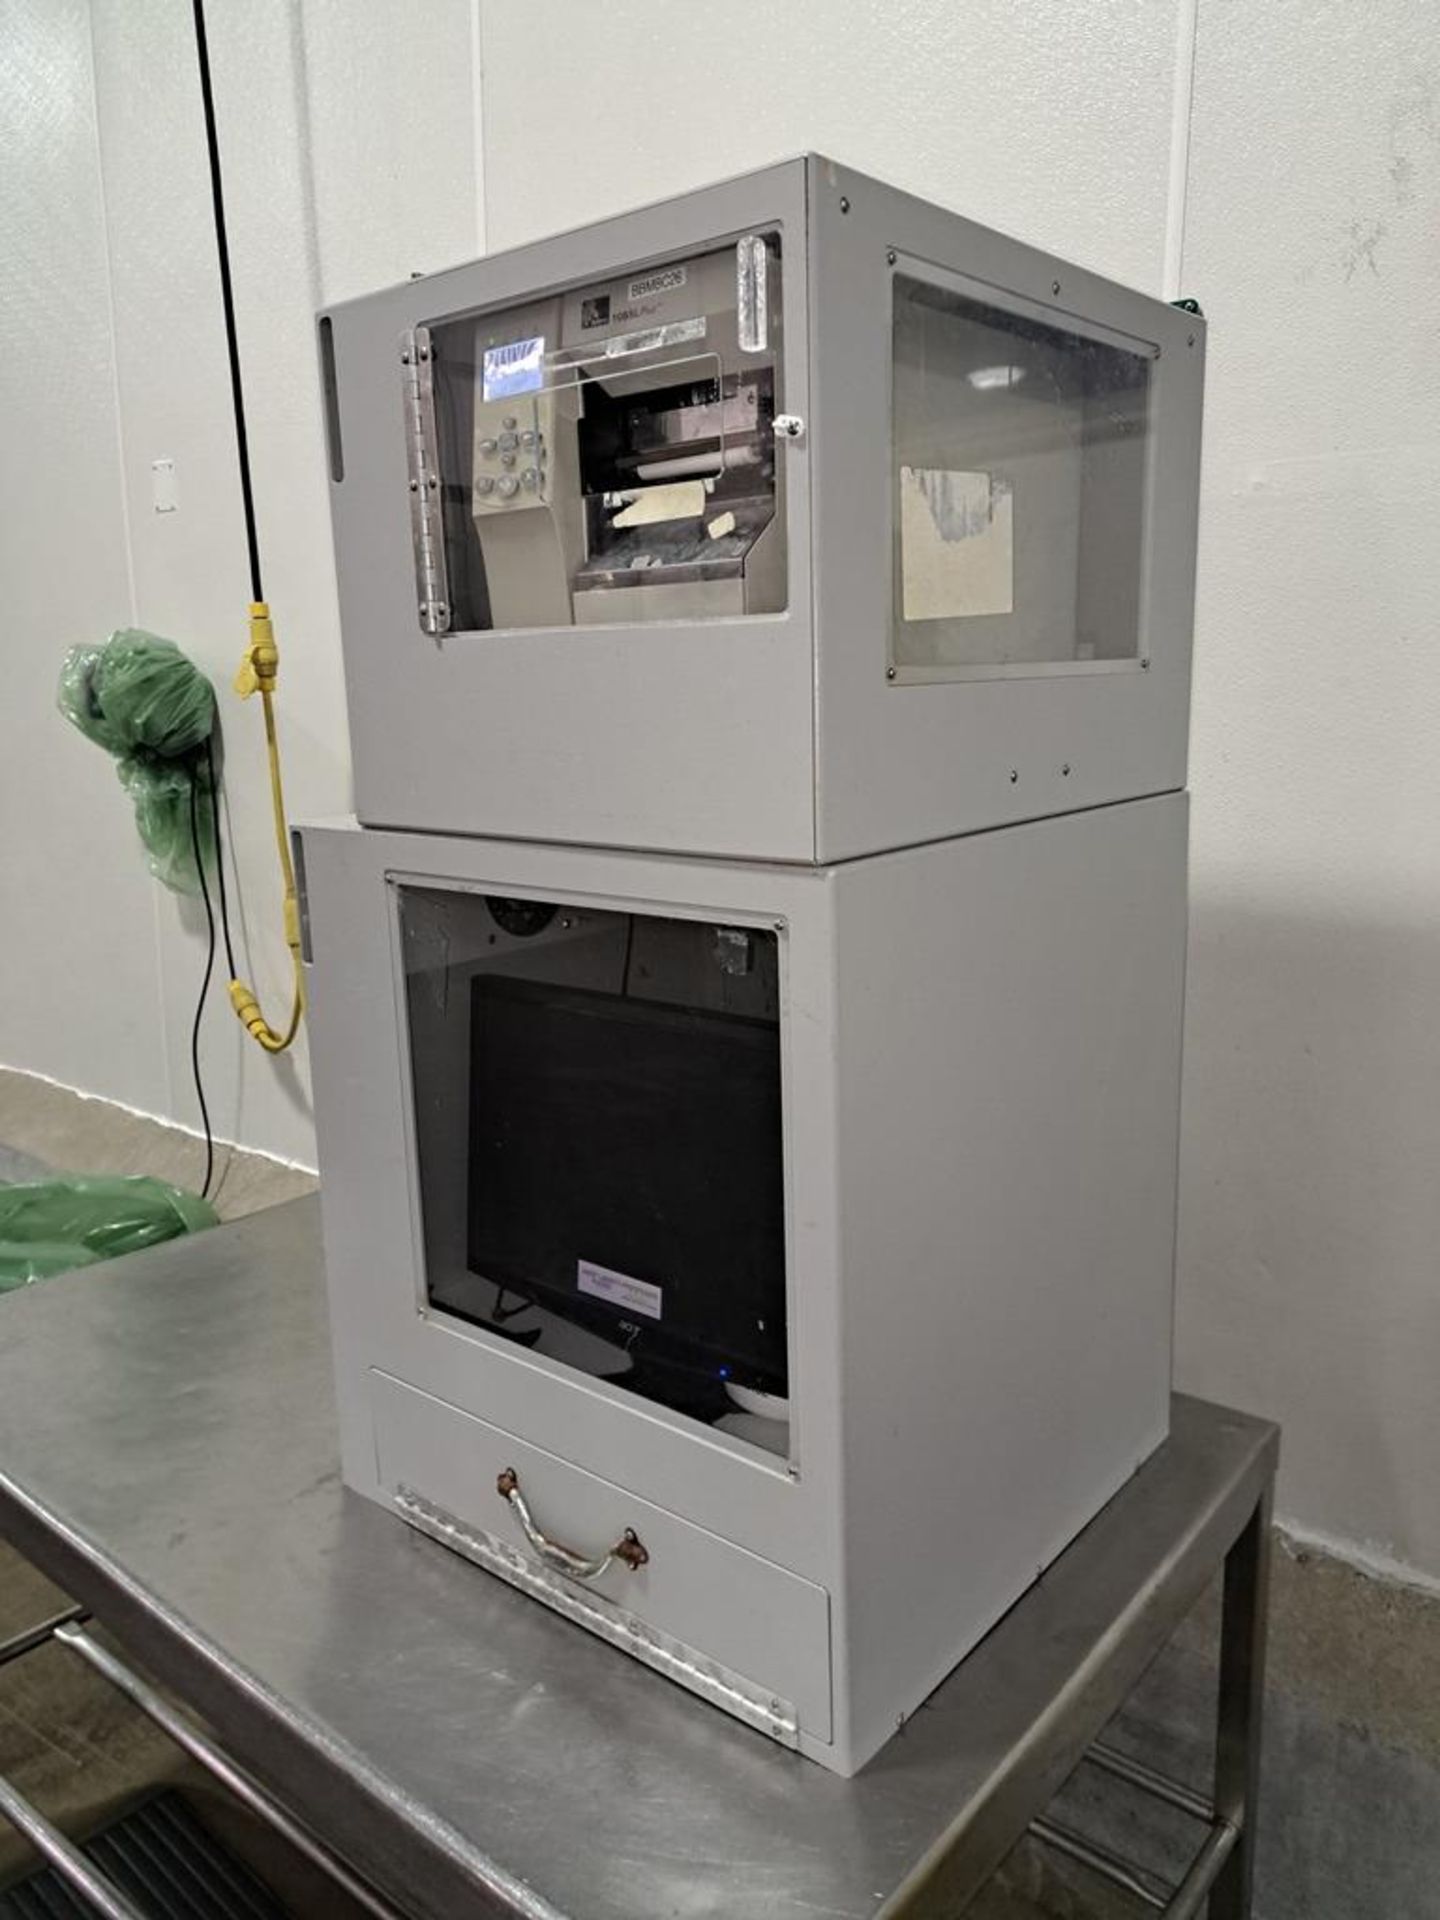 Zebra Mdl. 105SL Plus Label Printer with keyboard and monitor (Located in Bolingbrook, IL)(Loading - Image 2 of 3